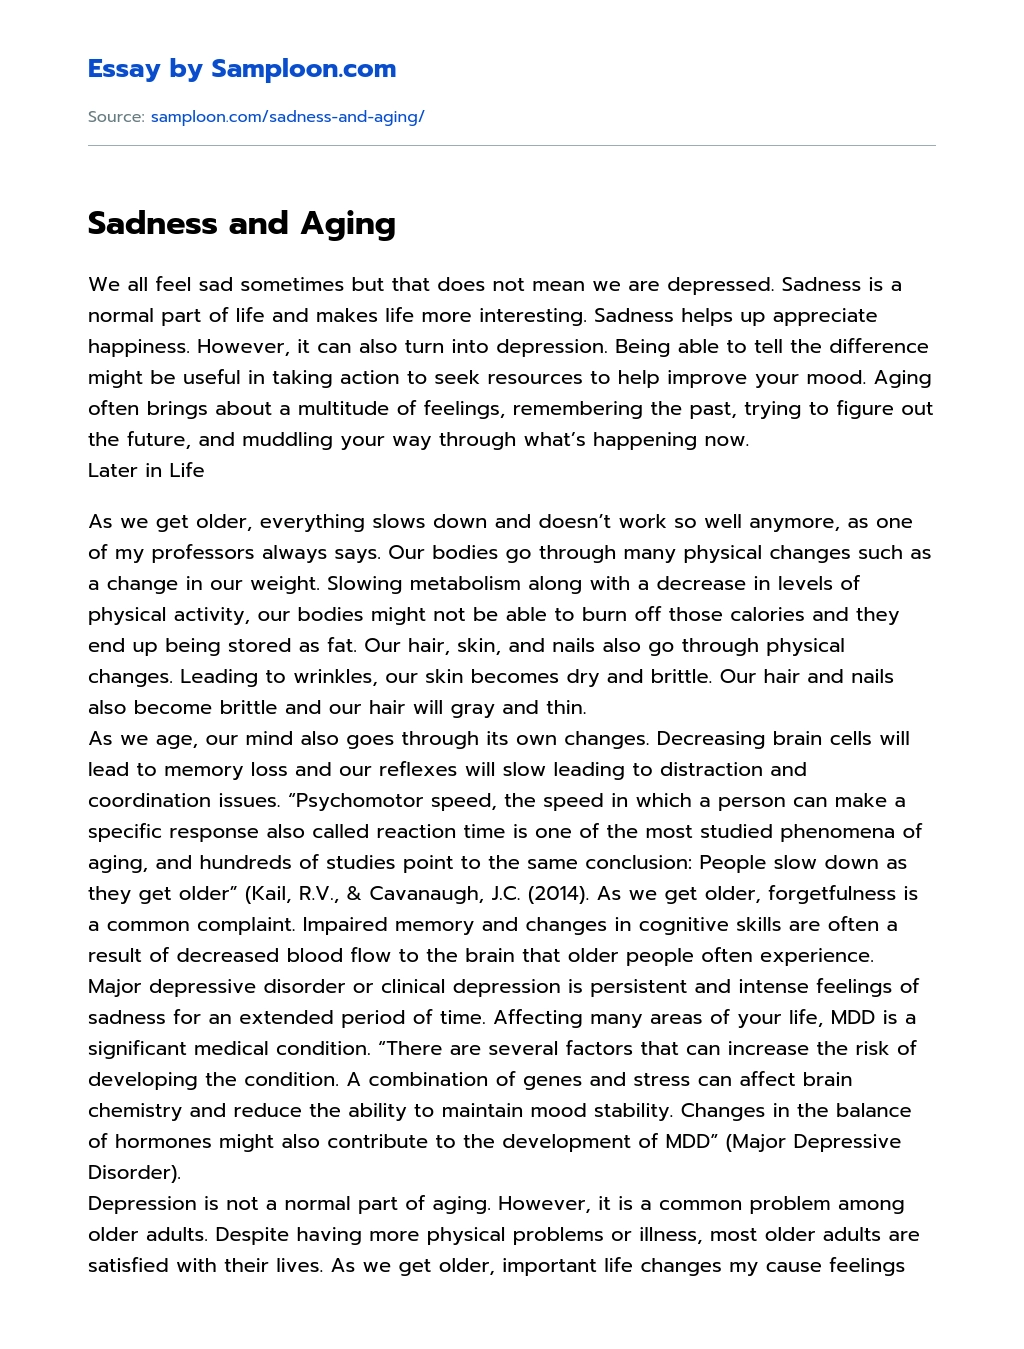 Sadness and Aging essay